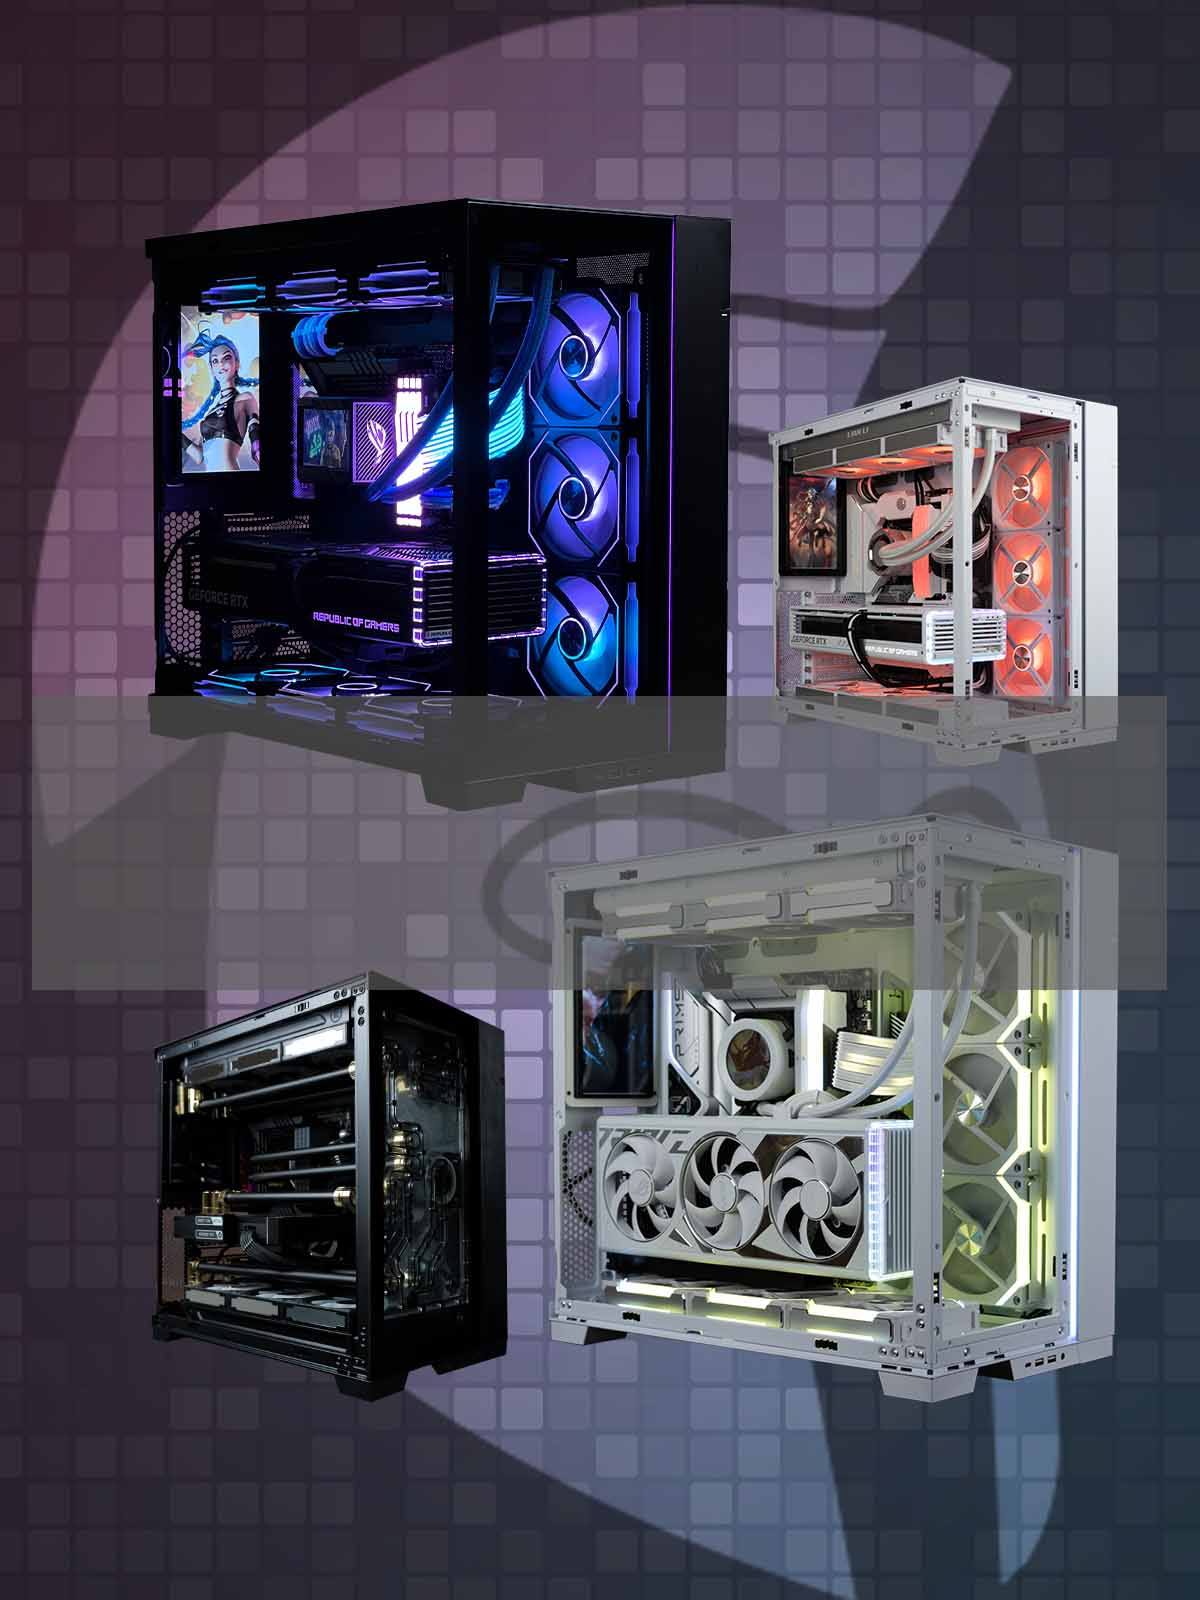 BUILD YOUR DREAM GAMING PC